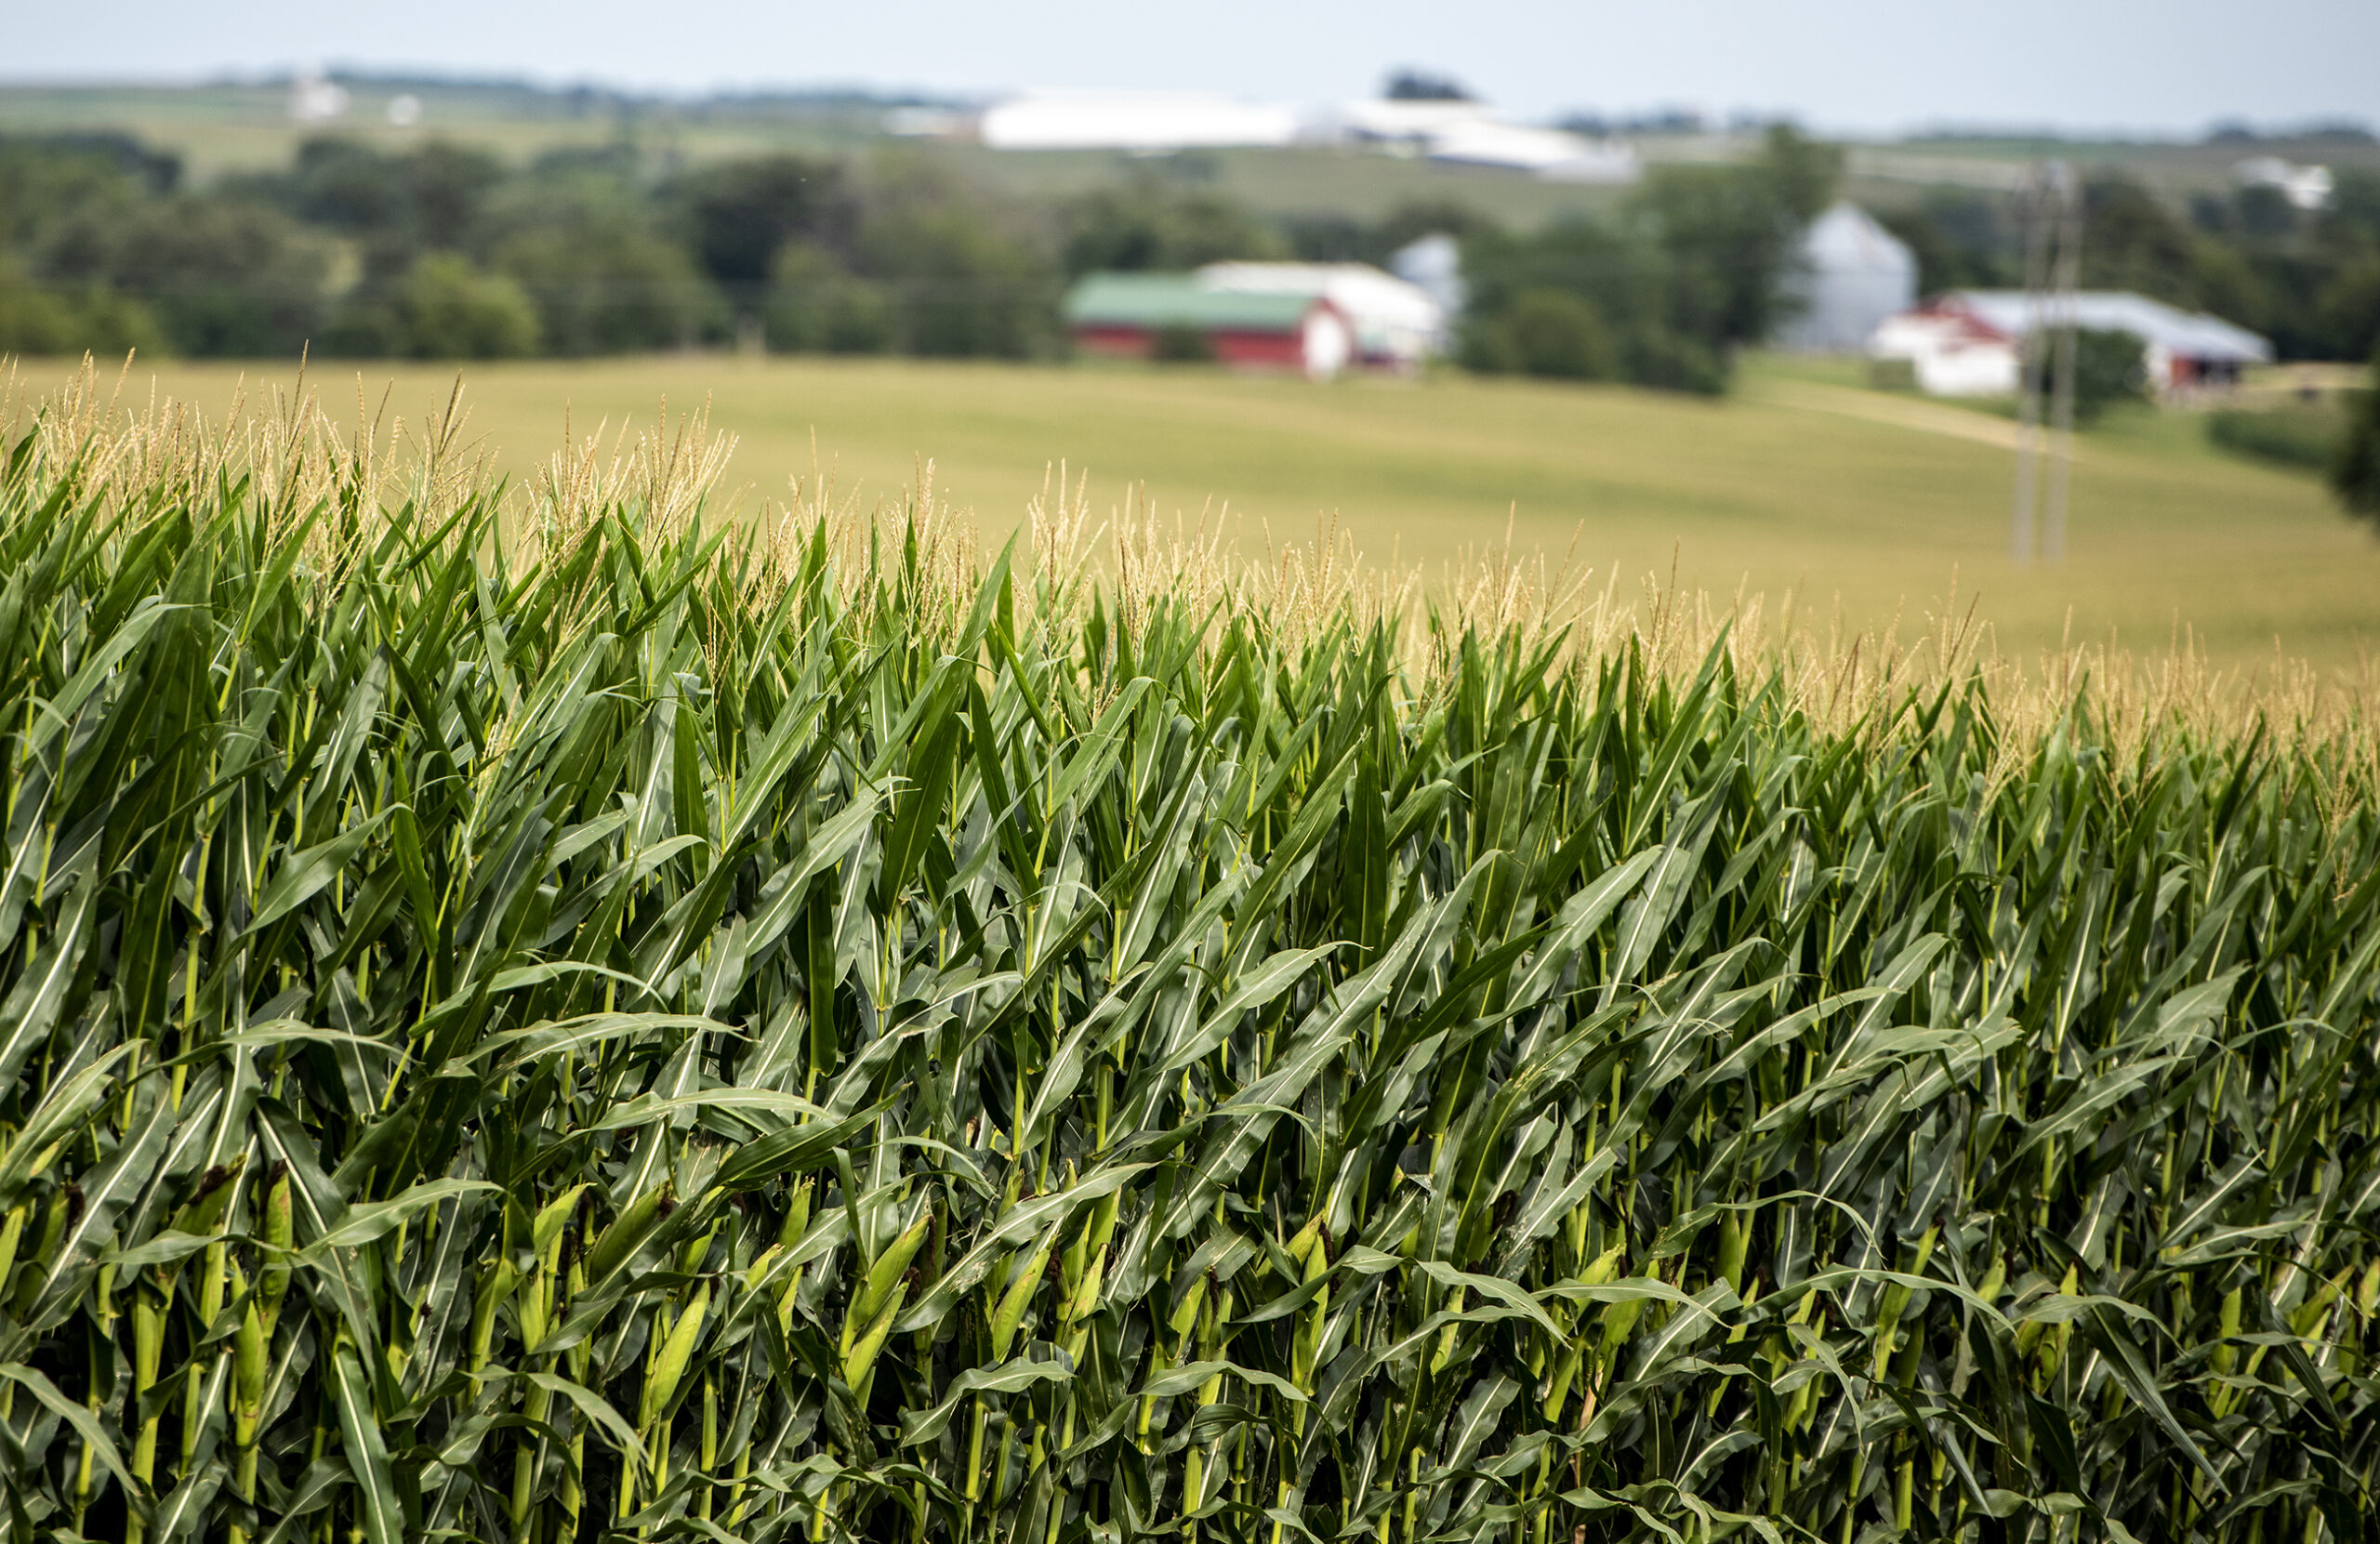 Survey: Value of Wisconsin farmland continues year-over-year increases